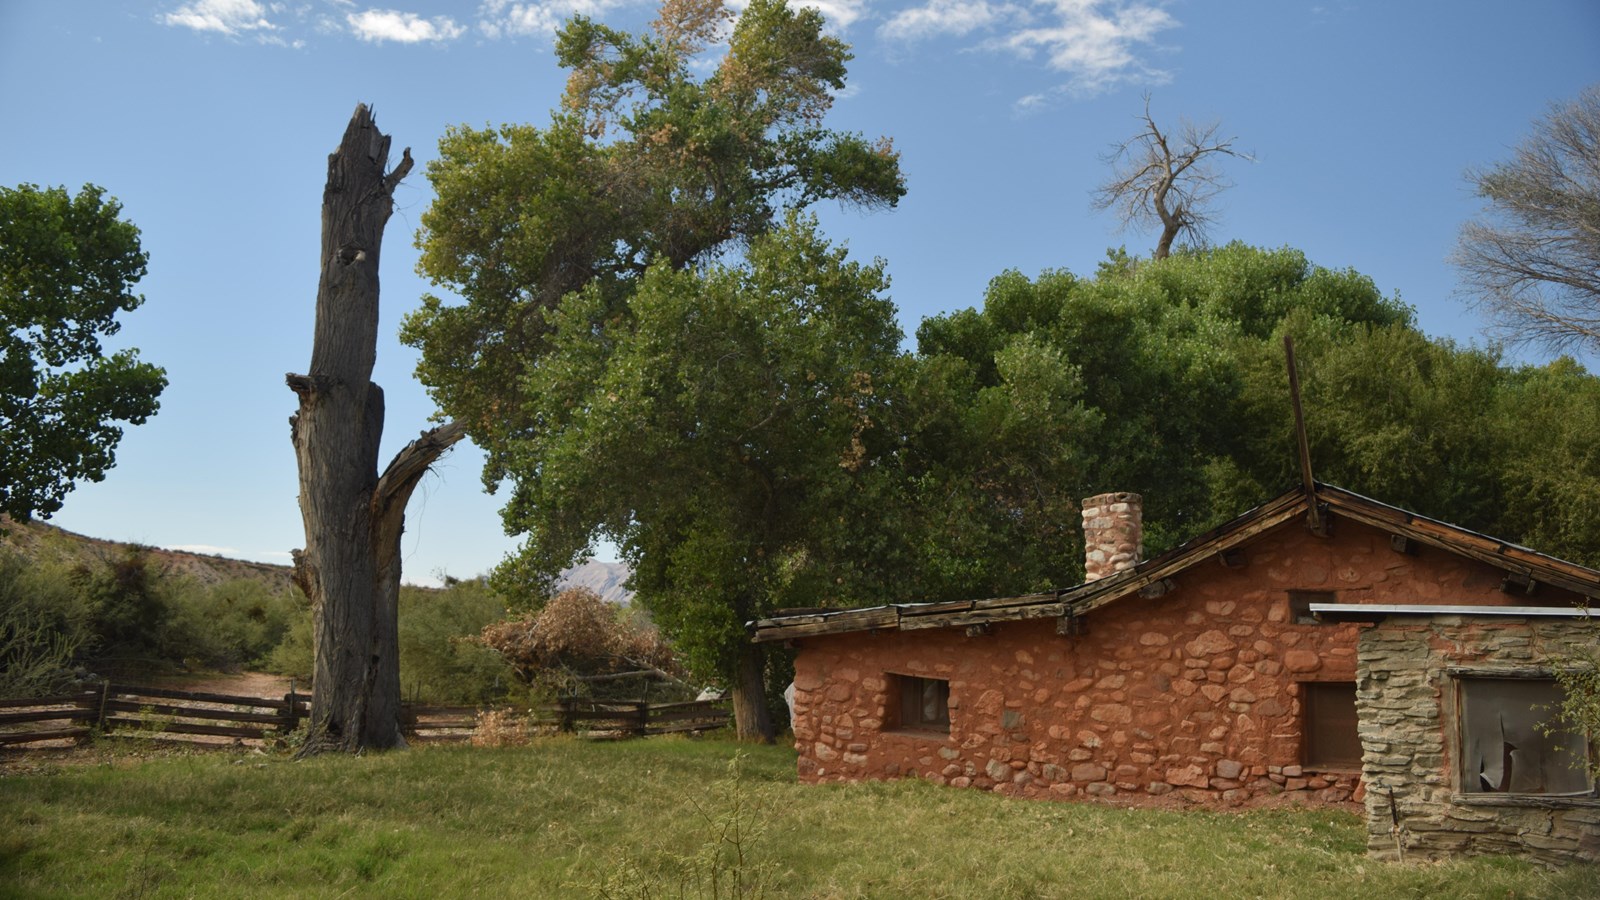 A rusty colored house made of rock with large cottonwood trees surrounding it. 